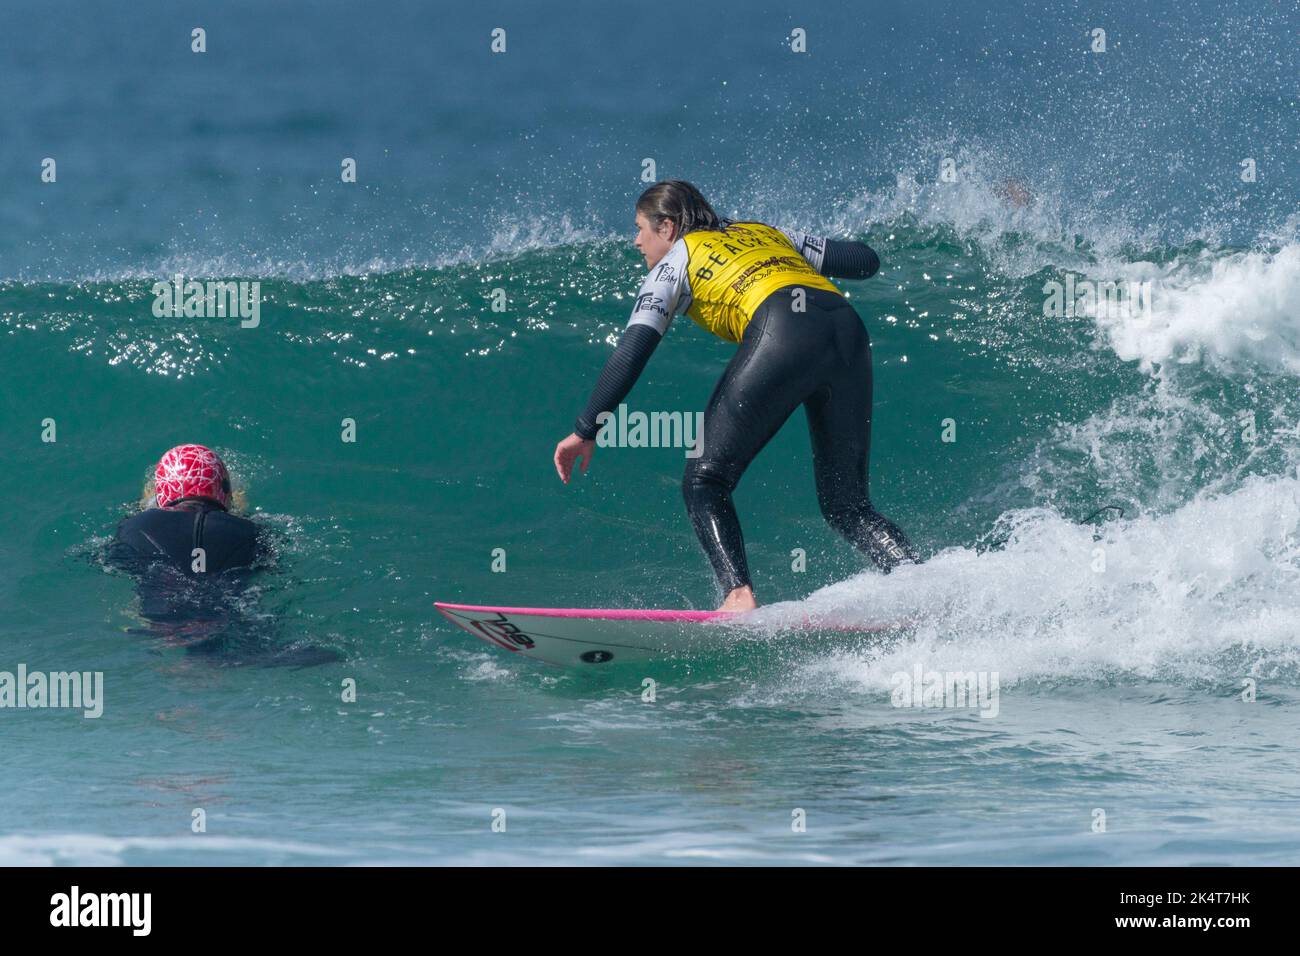 A surfer in a near collision with another surfer who is wearing a safety helmet at Fistral in Newquay in Cornwall in the UK. Stock Photo